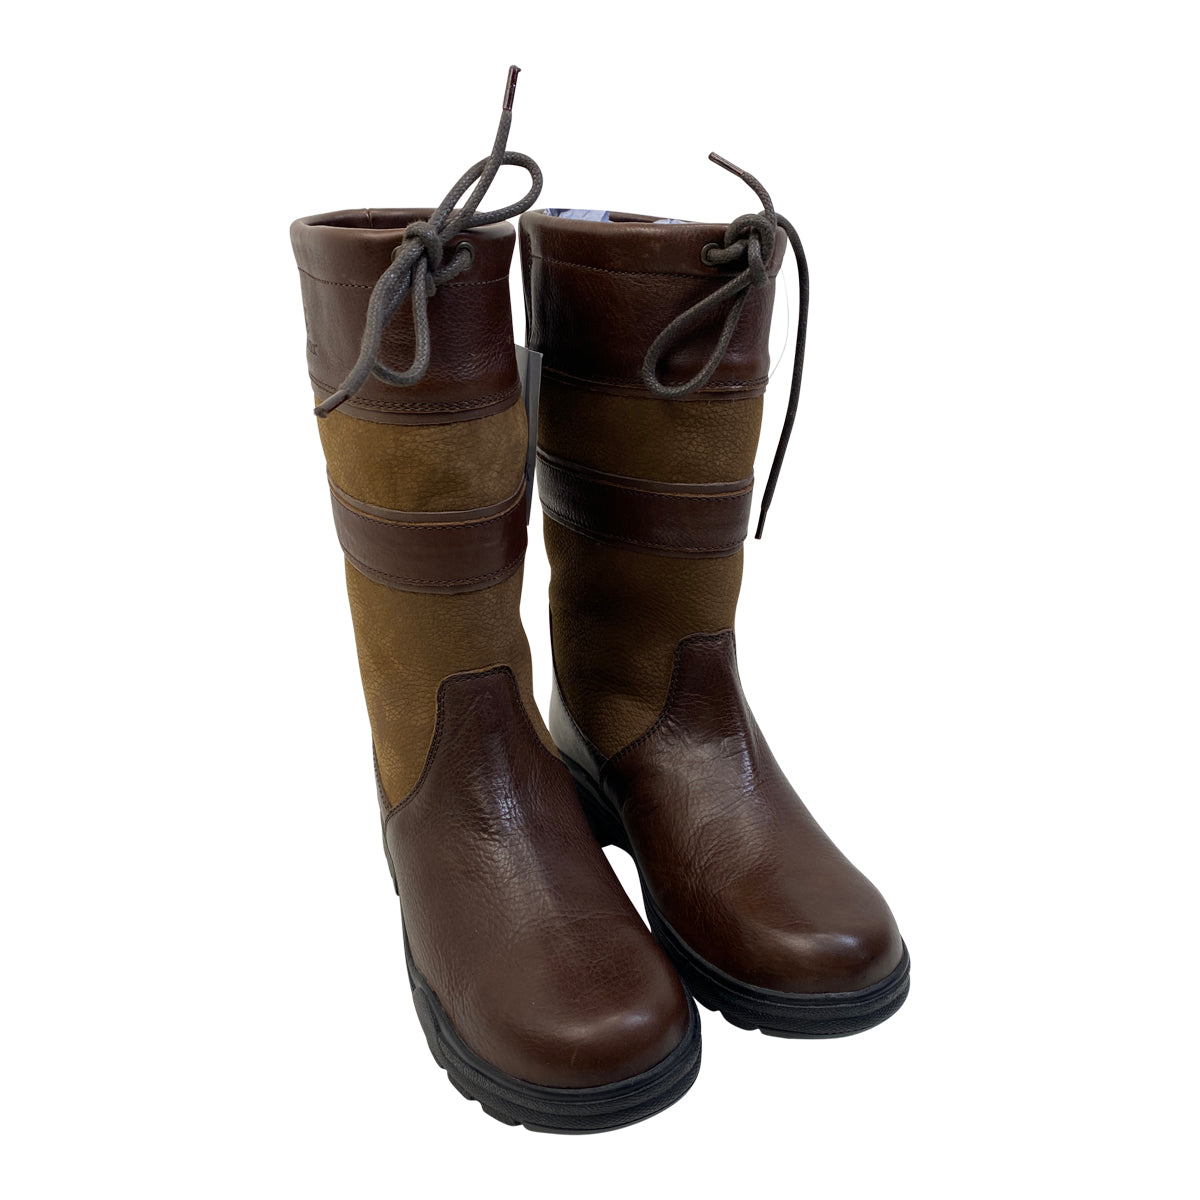 SmartPak 'Ada' Mid Country Leather Boots in Tan